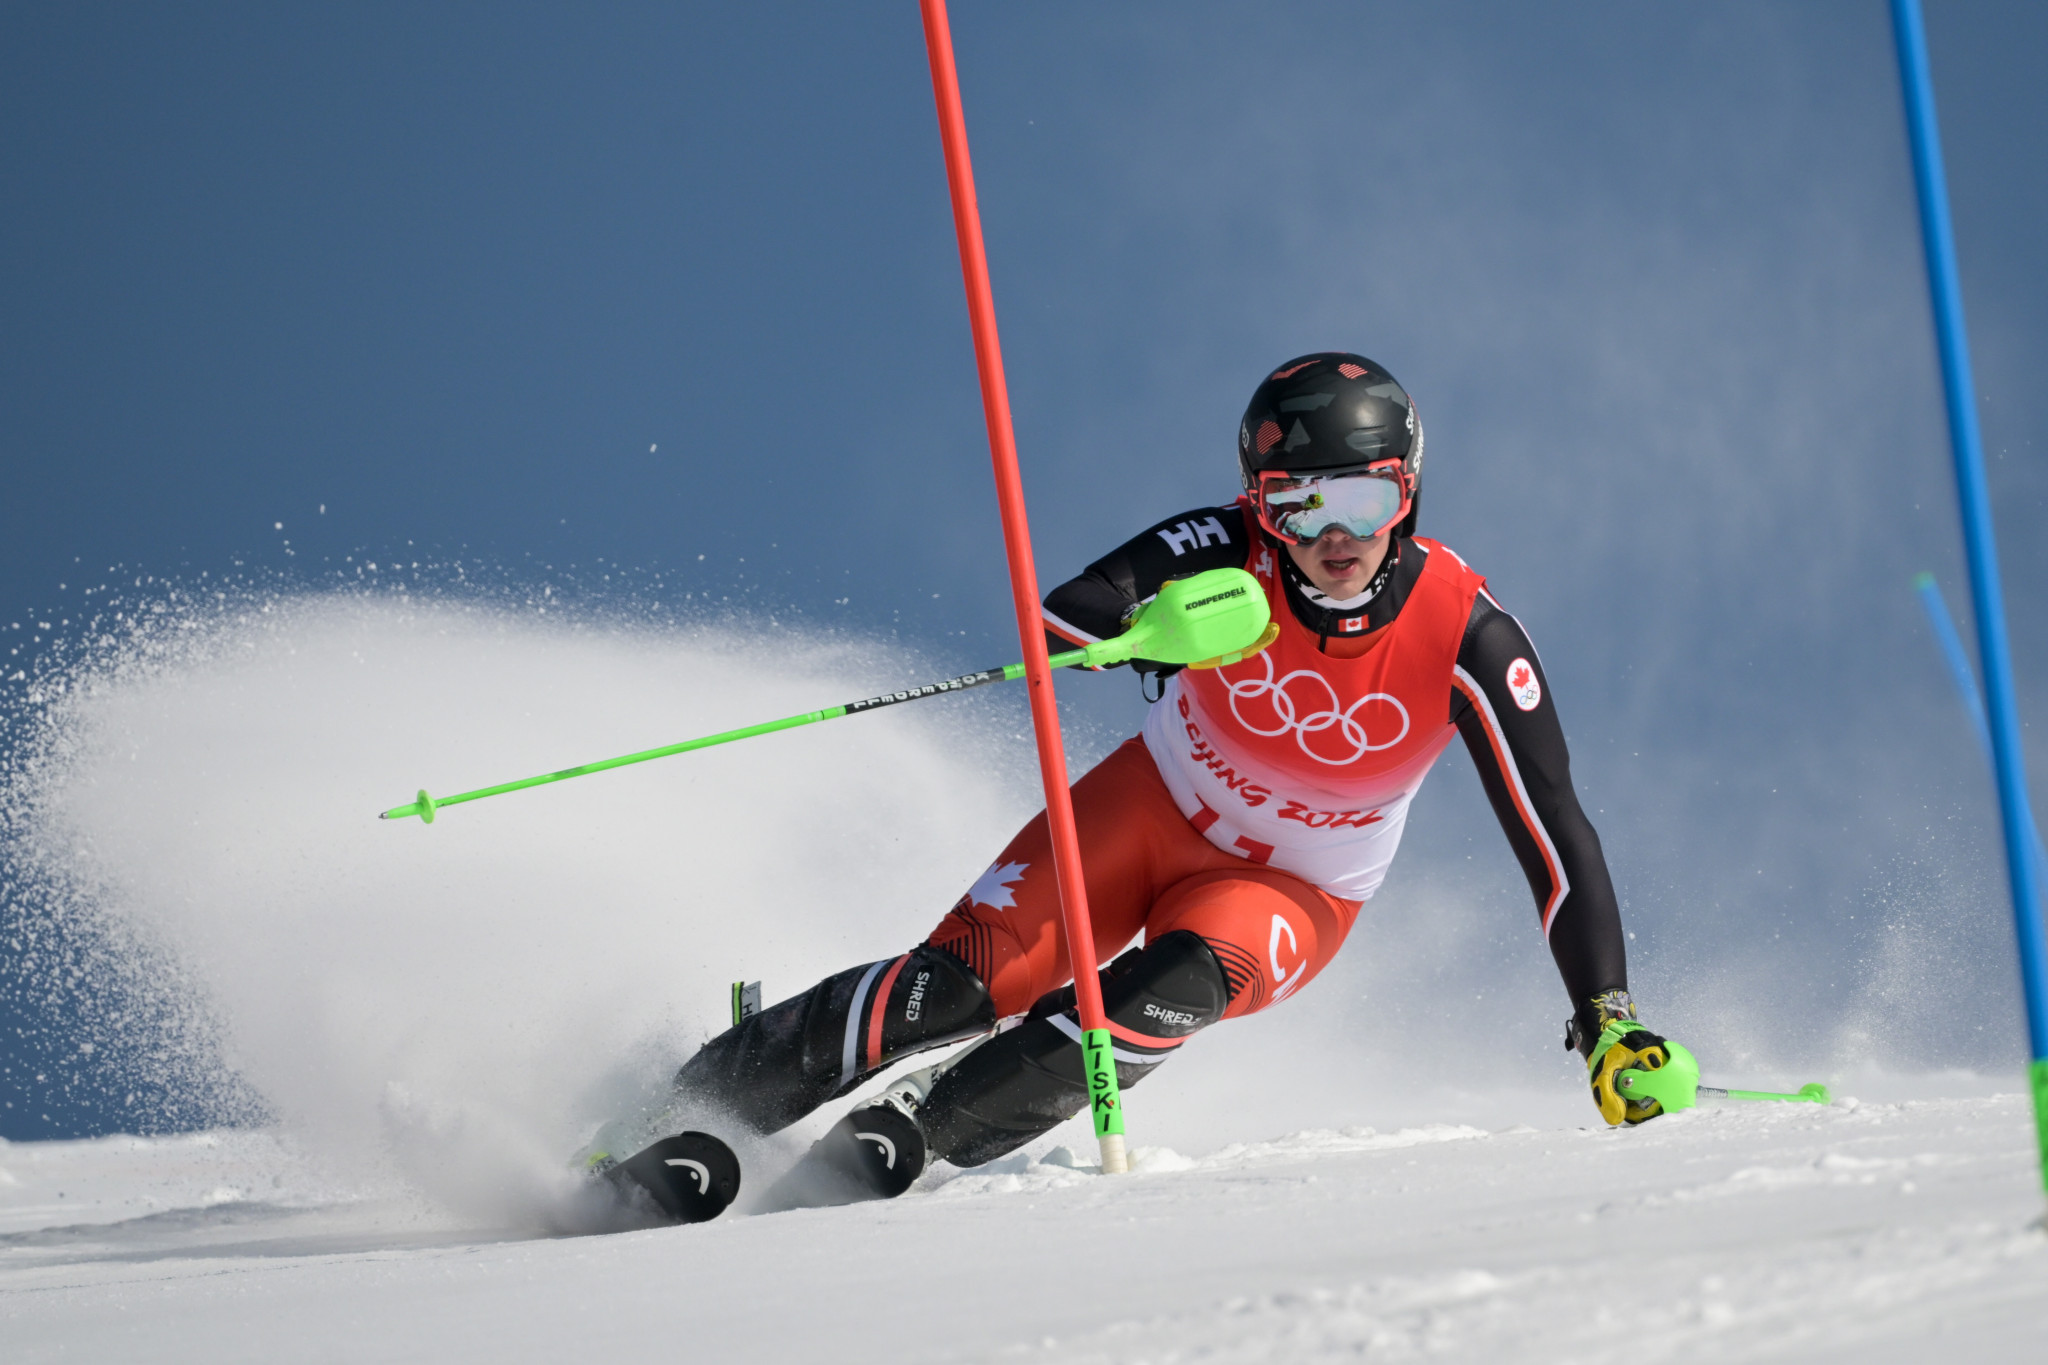 Red Tag is set to support Canada's national Alpine skiing team with its travel needs under the partnership ©Getty Images